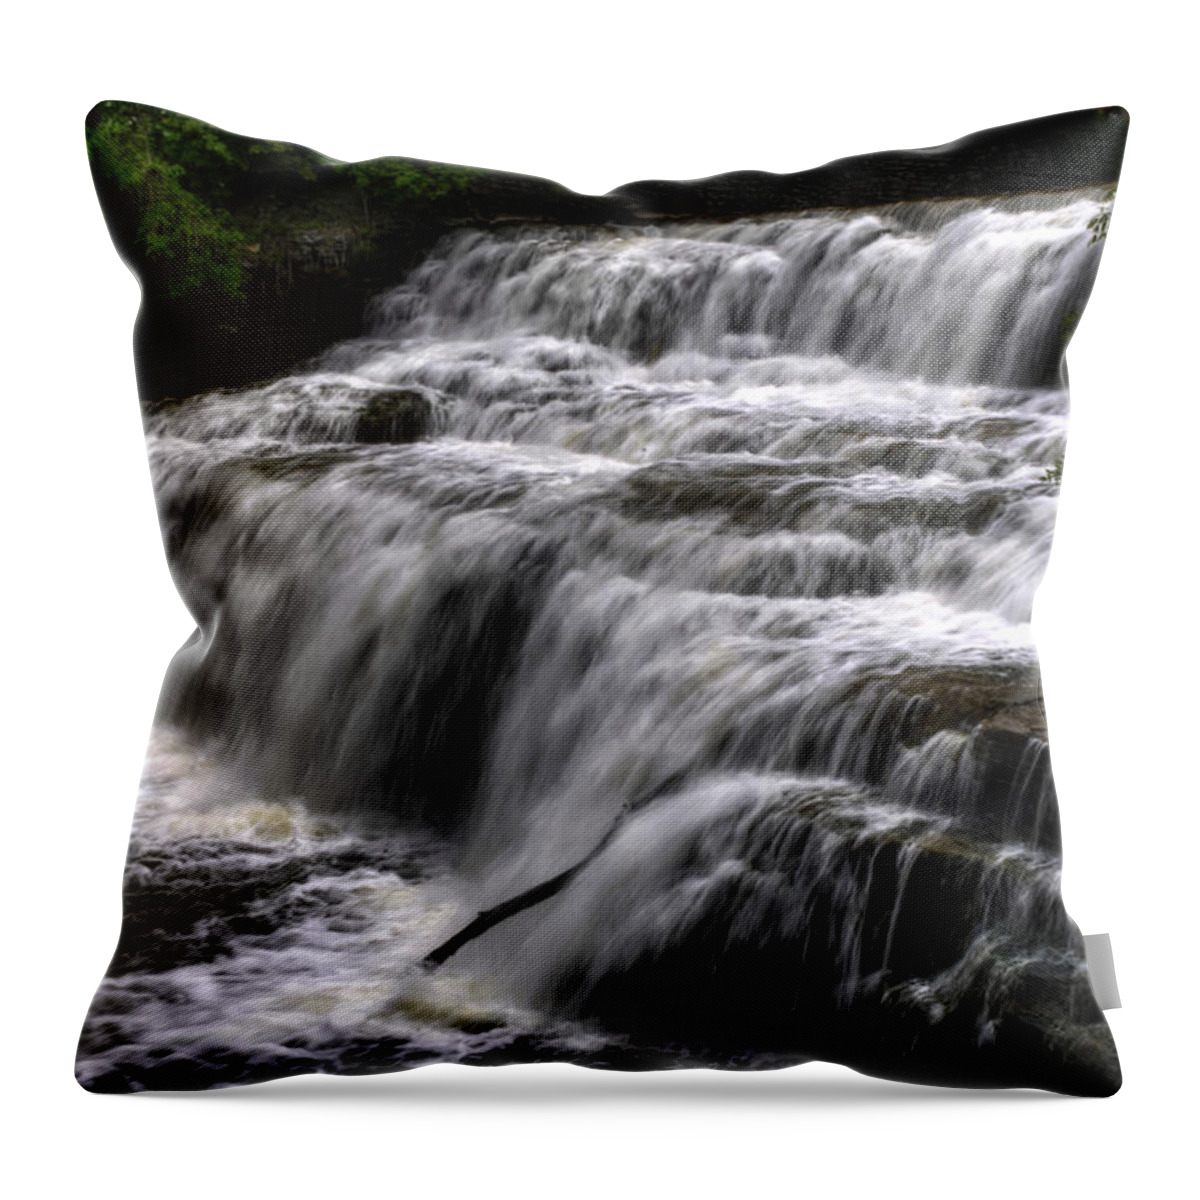 Michael Frank Jr Throw Pillow featuring the photograph 02 Glen Falls Williamsville Ny by Michael Frank Jr